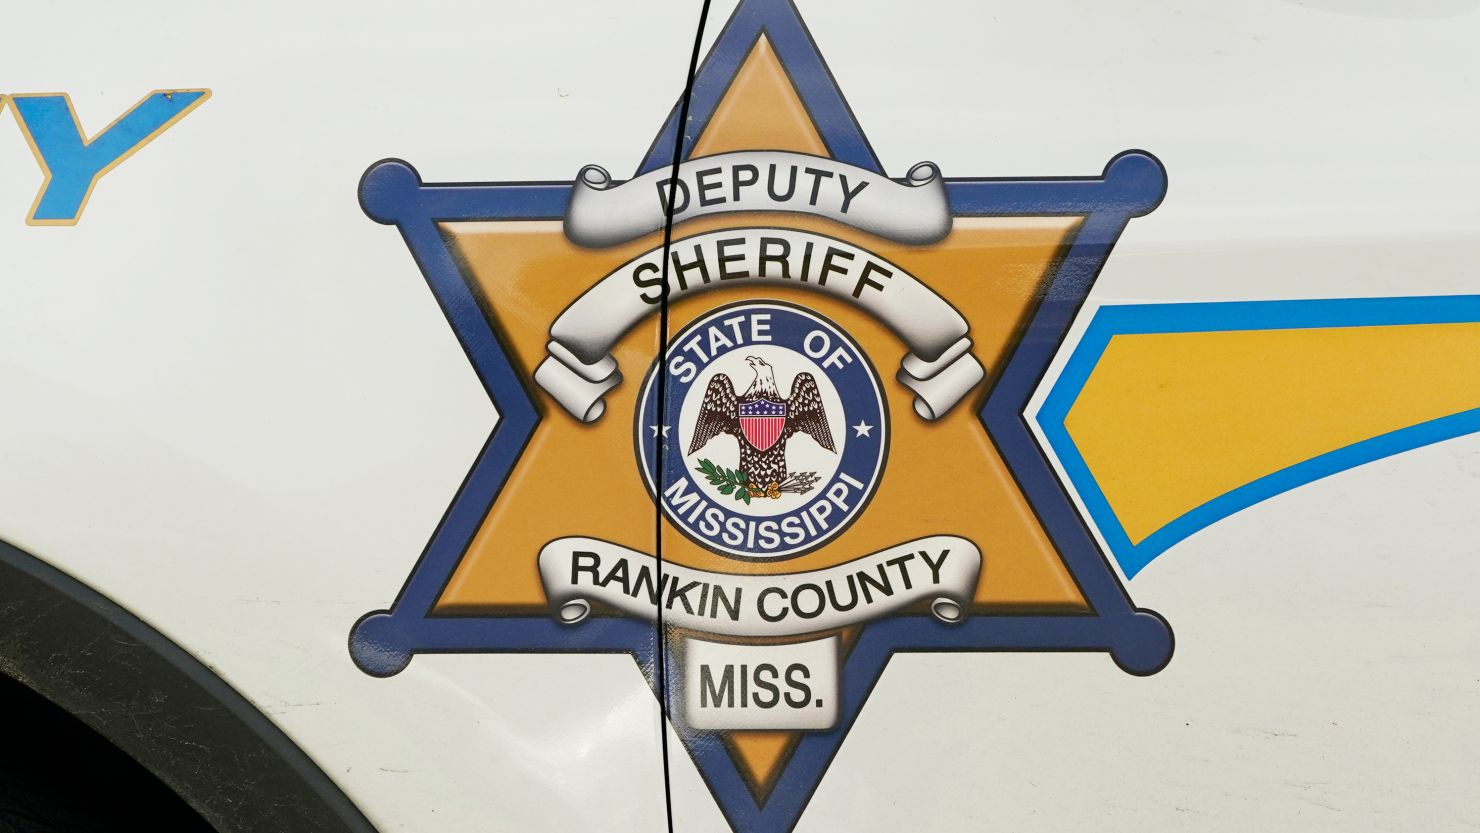 A Rankin County Sheriff's Deputy badge logo is displayed on one of their vehicles in Brandon, Miss., Friday, March 3, 2023. Several members of a special unit of the Rankin County sheriff's department that's being investigated by the U.S. Justice Department for possible civil rights violations have been involved in at least four violent encounters with Black men since 2019 that left two dead and another with lasting injuries. (AP Photo/Rogelio V. Solis)